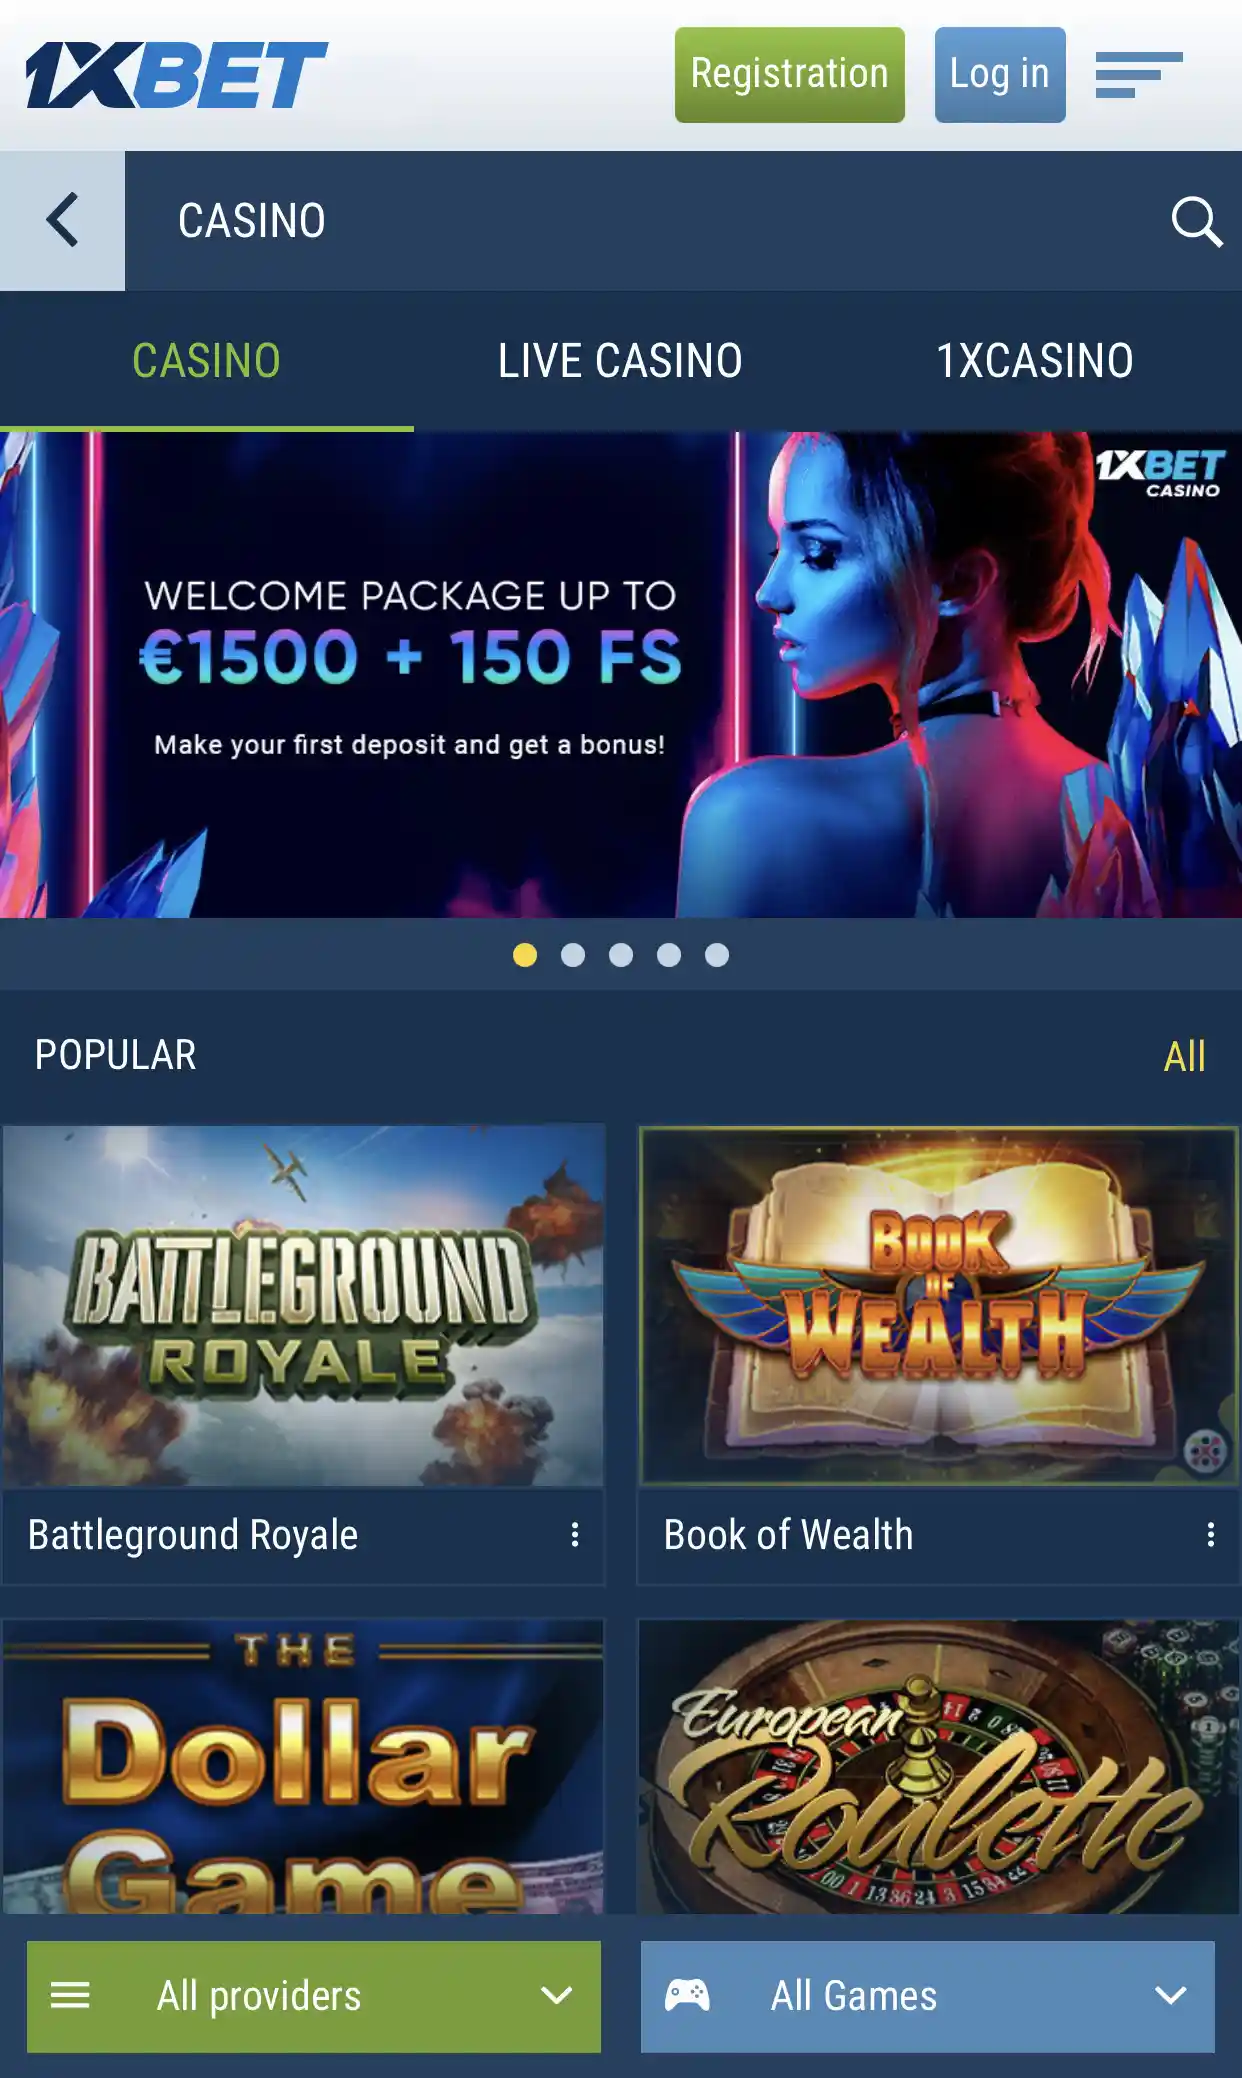 On the 1xbet homepage you can find out about the company's main bonuses and most popular games.